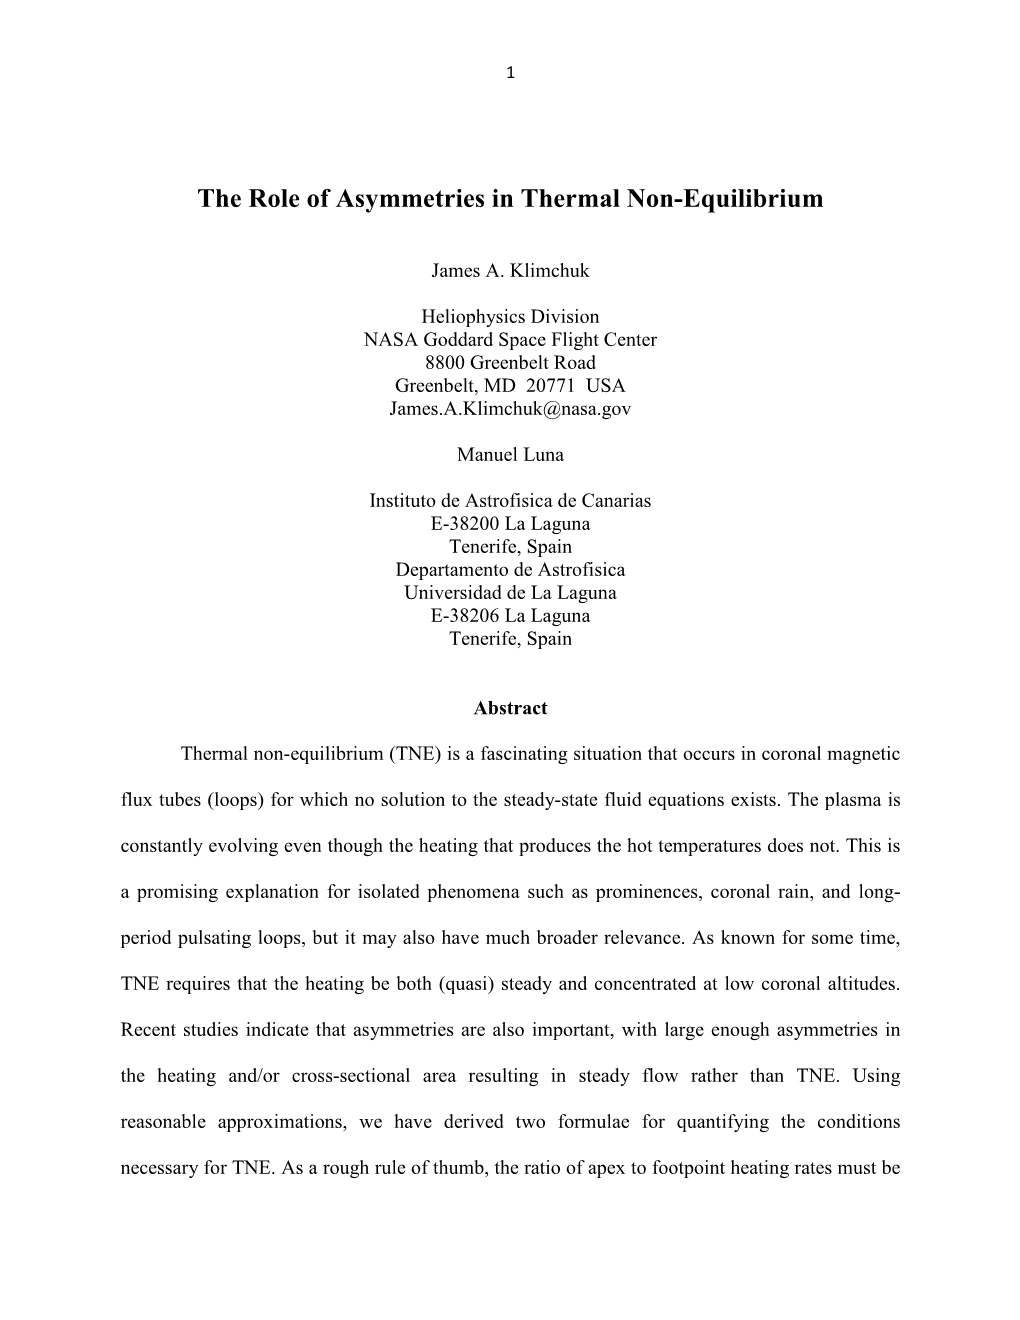 The Role of Asymmetries in Thermal Non-Equilibrium